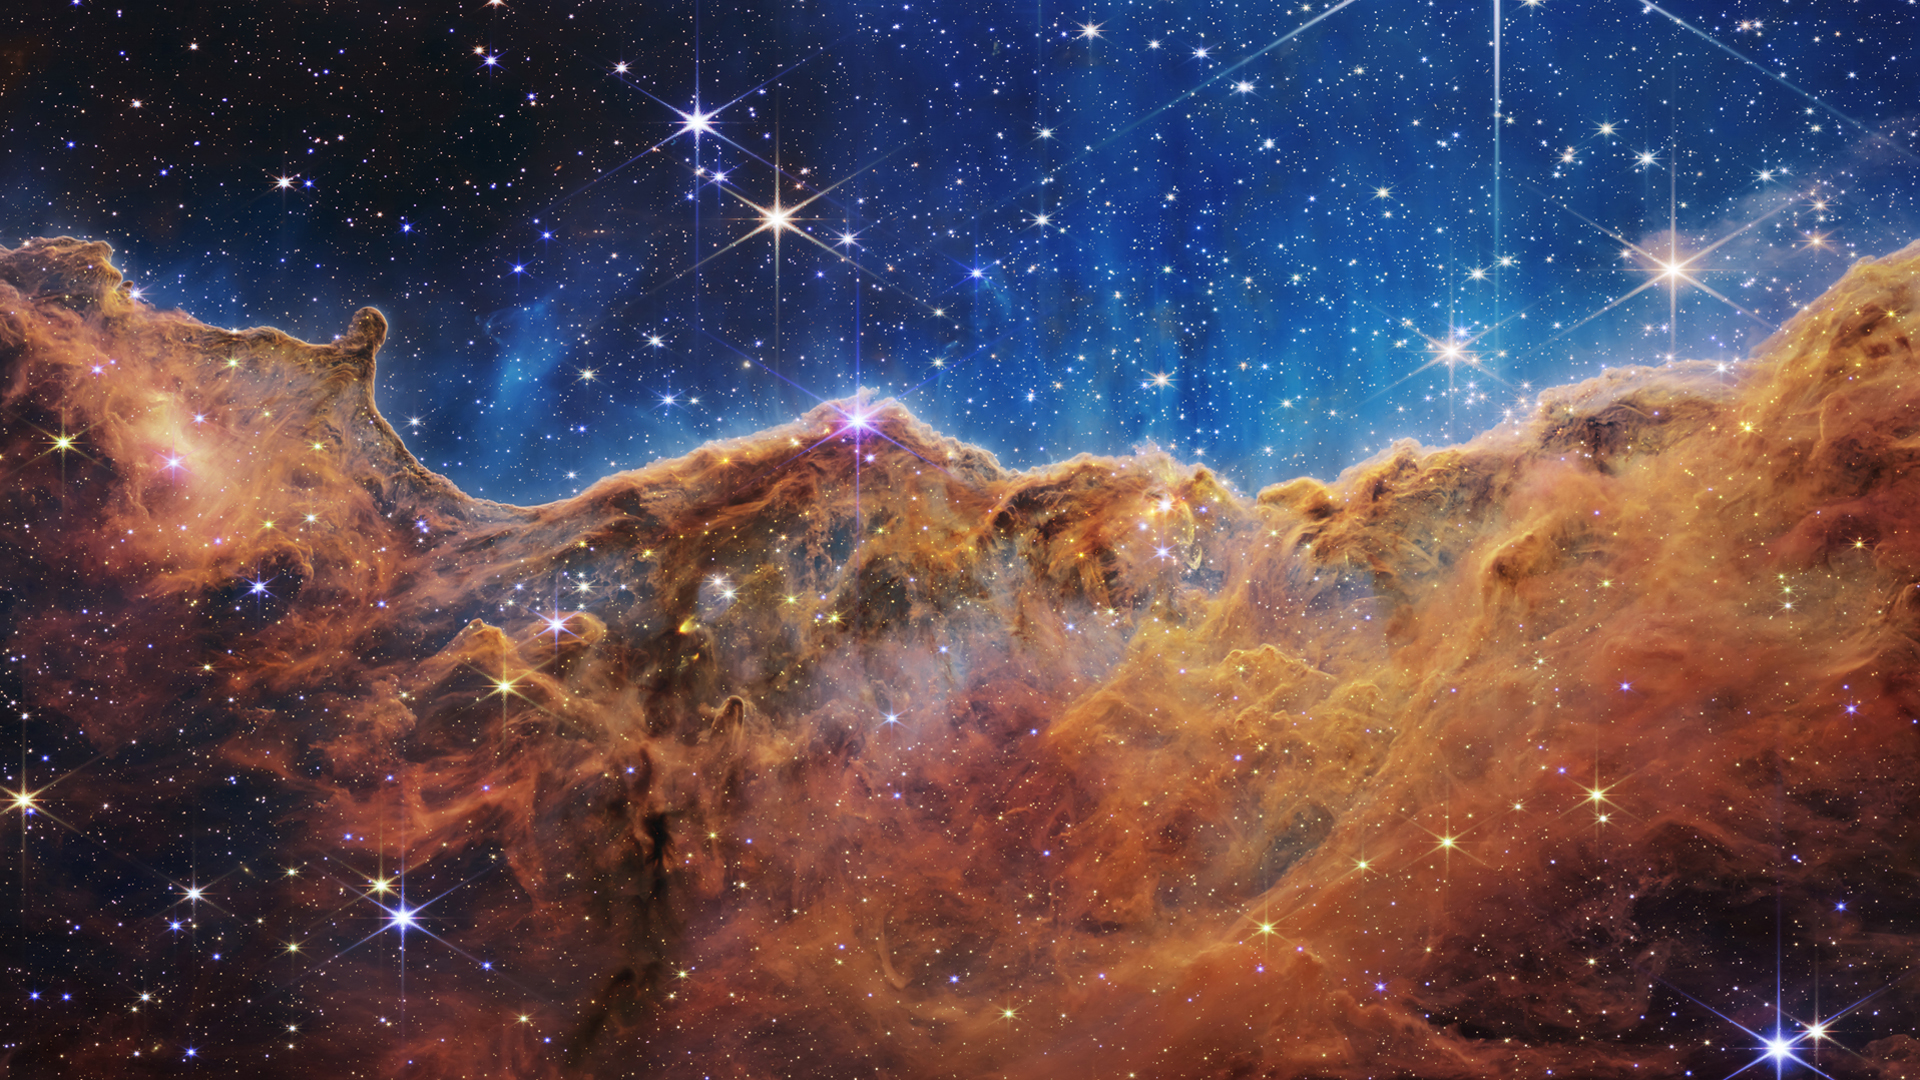 The Cosmic Cliffs in Carina Nebula captured by the James Webb Space Telescope.